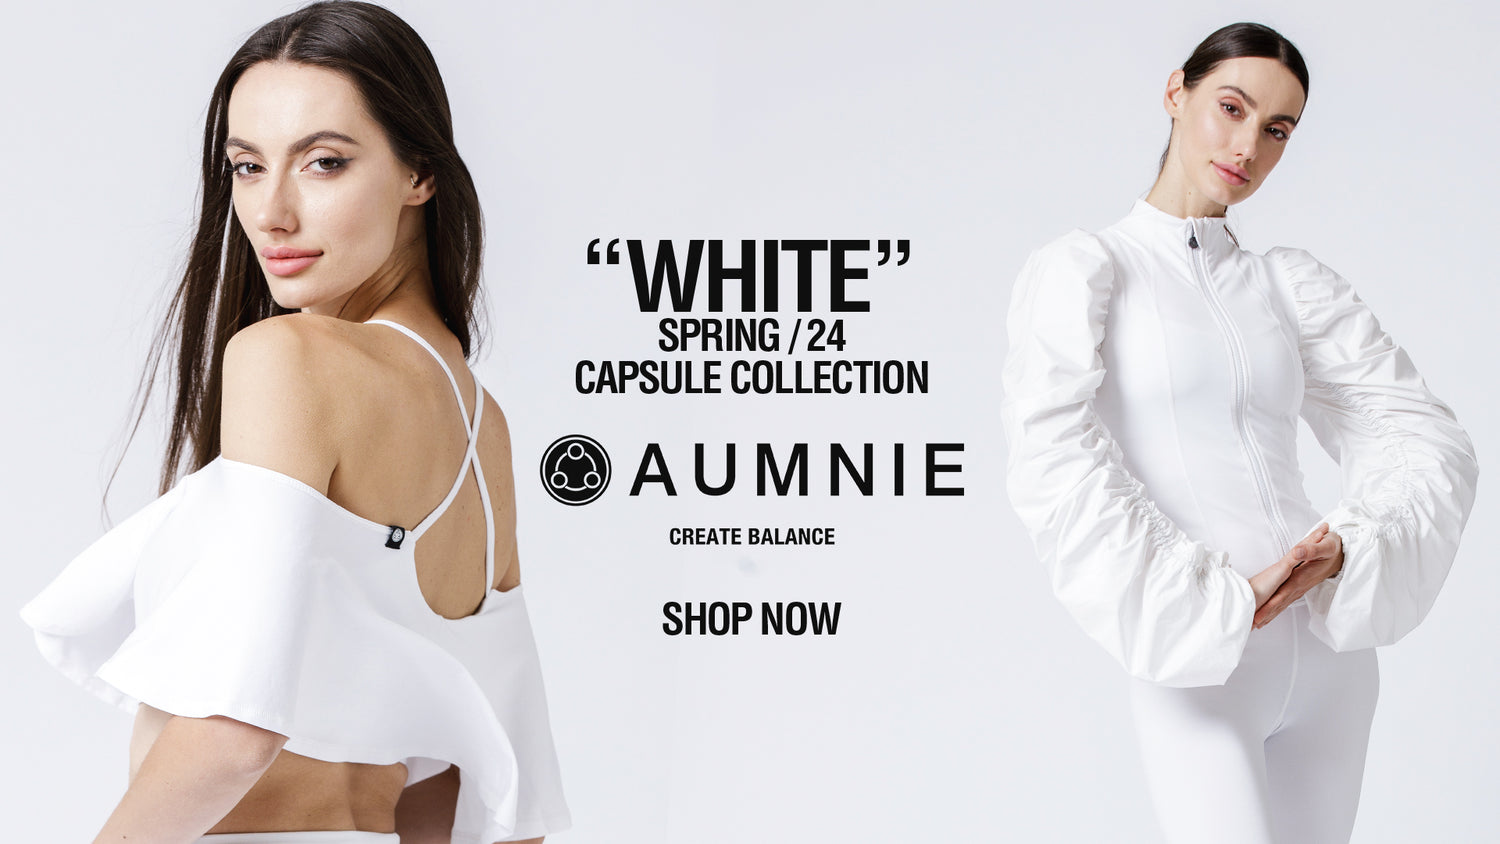 AUMNIE WHITE Capsule Collection Campaign Poster for Spring 2024